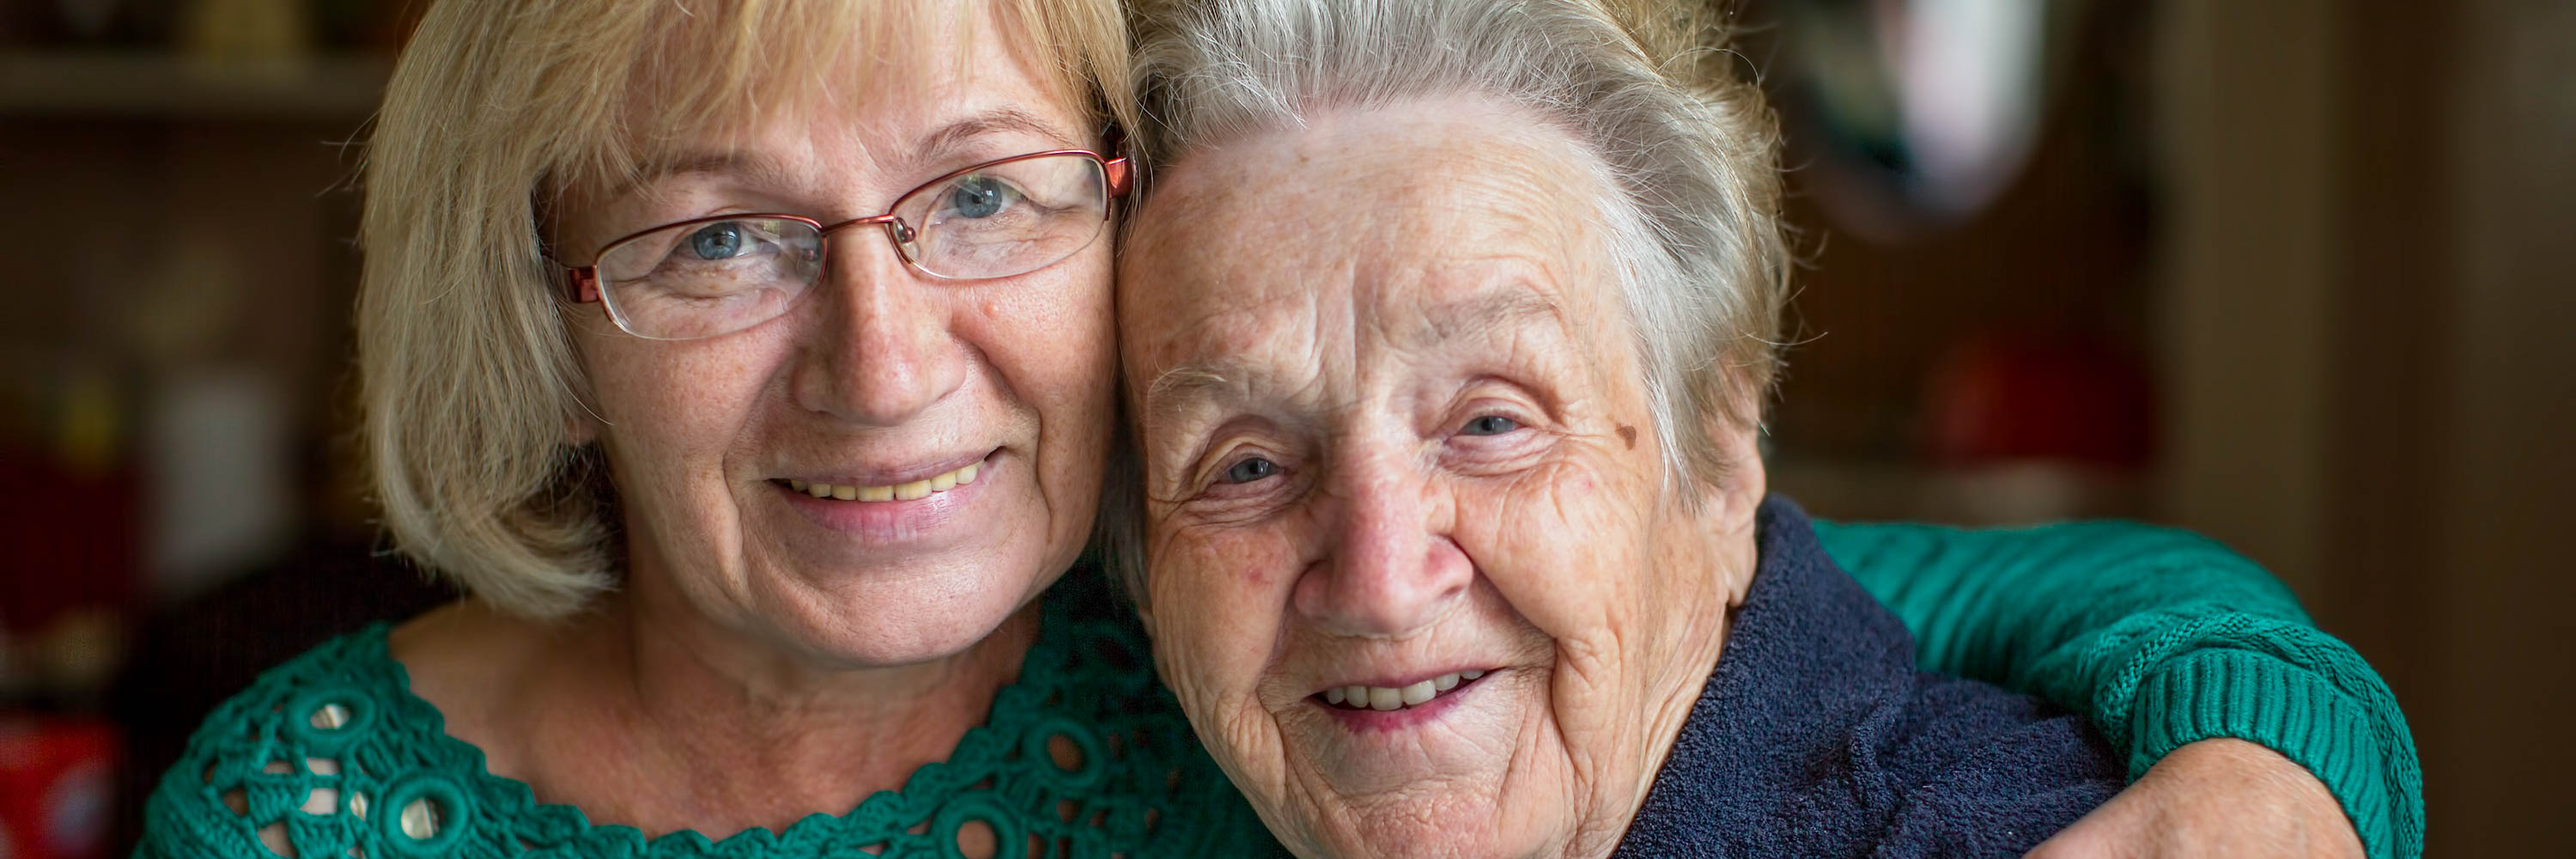 Close-up portrait of a mature women with glasses holding a senior women as they both smile.